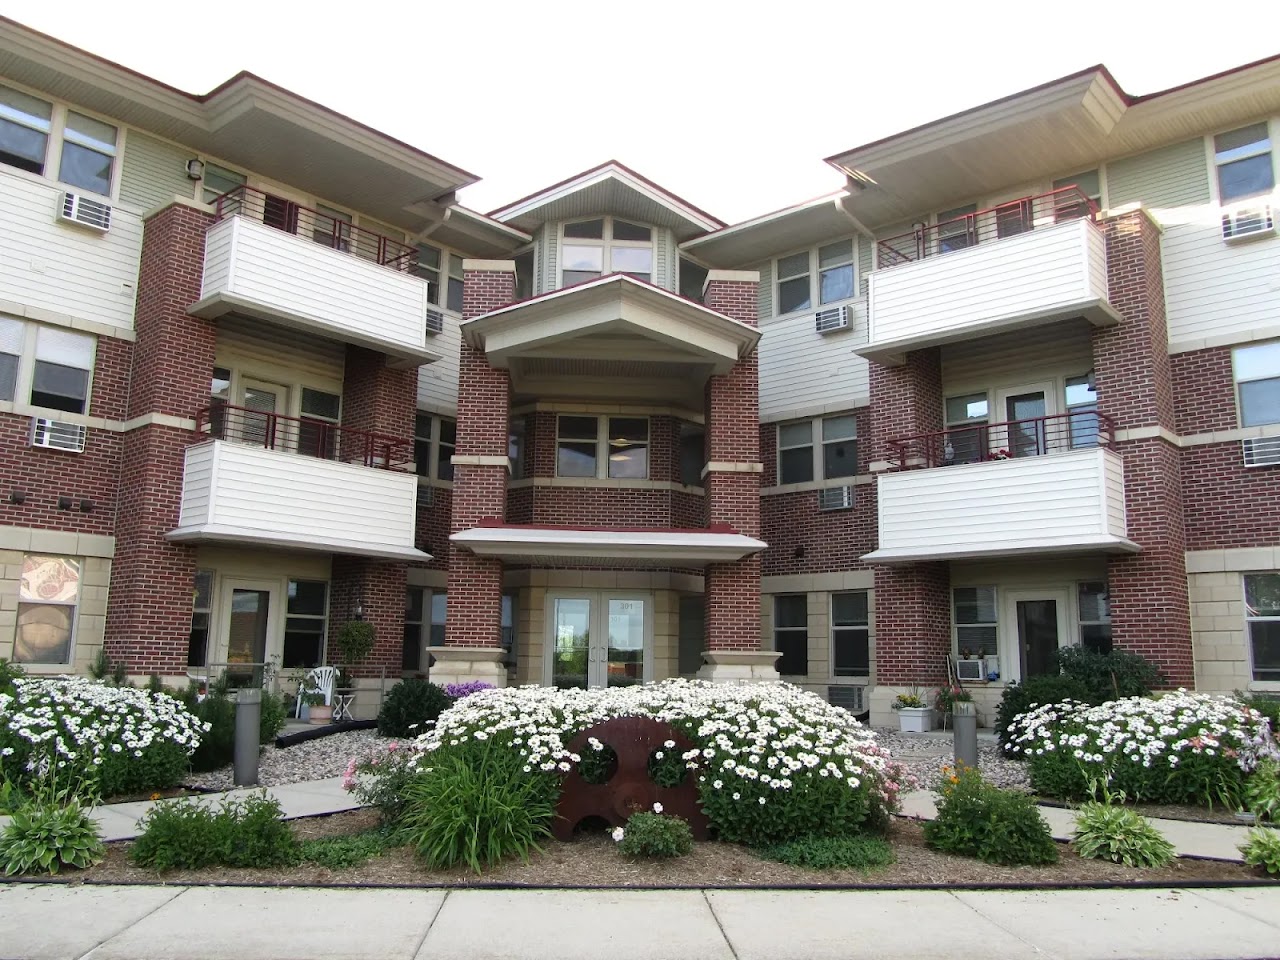 Photo of CANNERY ROW SENIOR APTS at 301 E THIRD ST WAUNAKEE, WI 53597